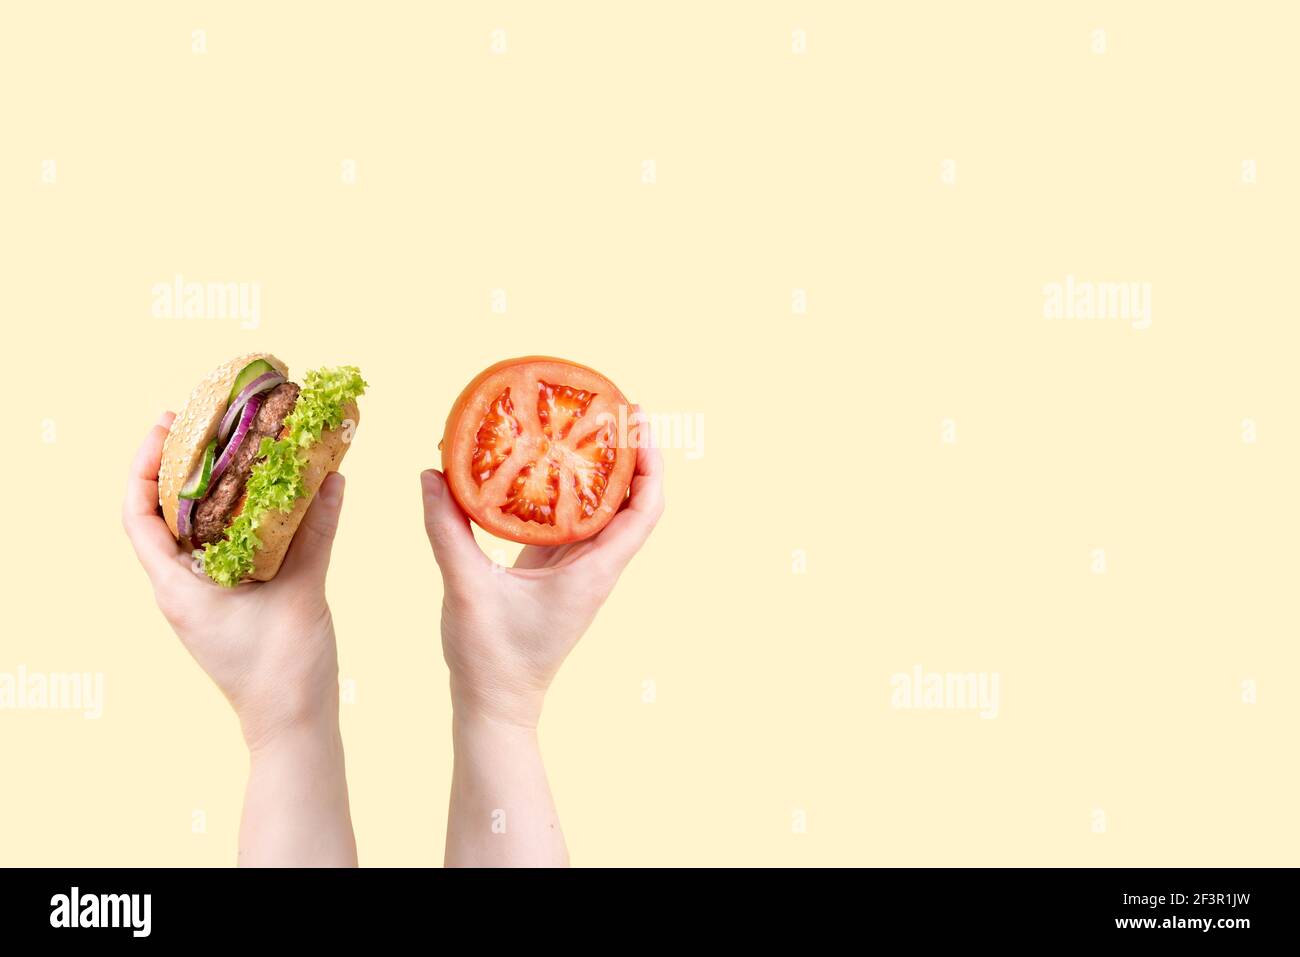 One female hand holding a burger, the other is holding a tomato on the yellow background, the choice of a way to eat concept. Stock Photo